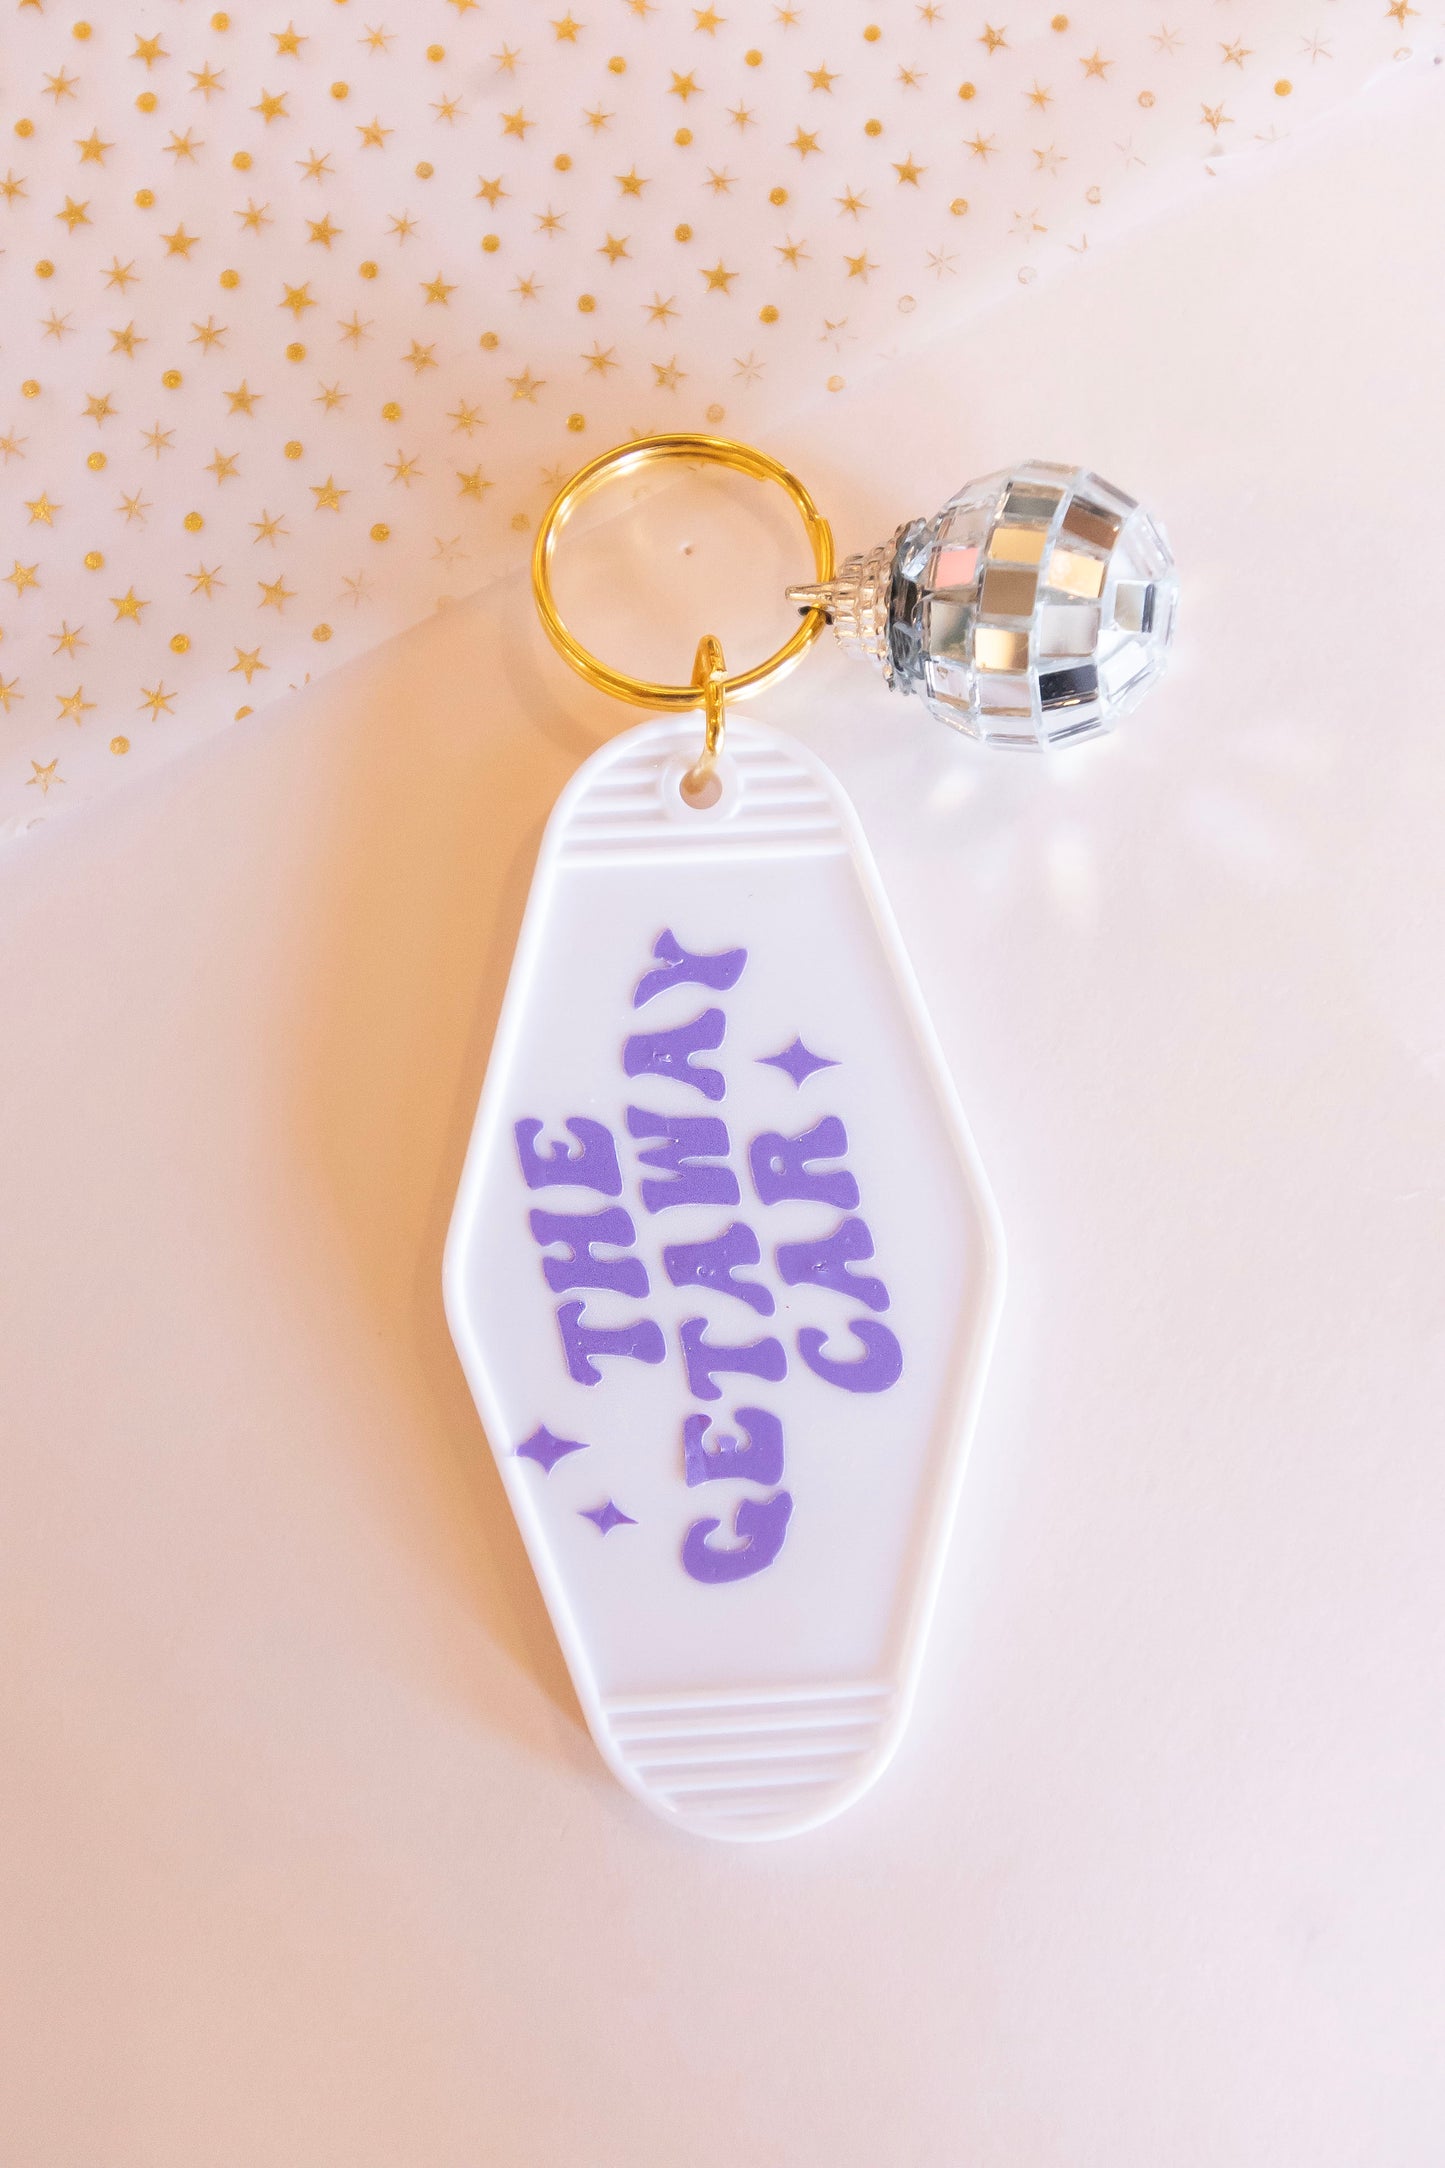 Load image into Gallery viewer, The Getaway Car Keychain
